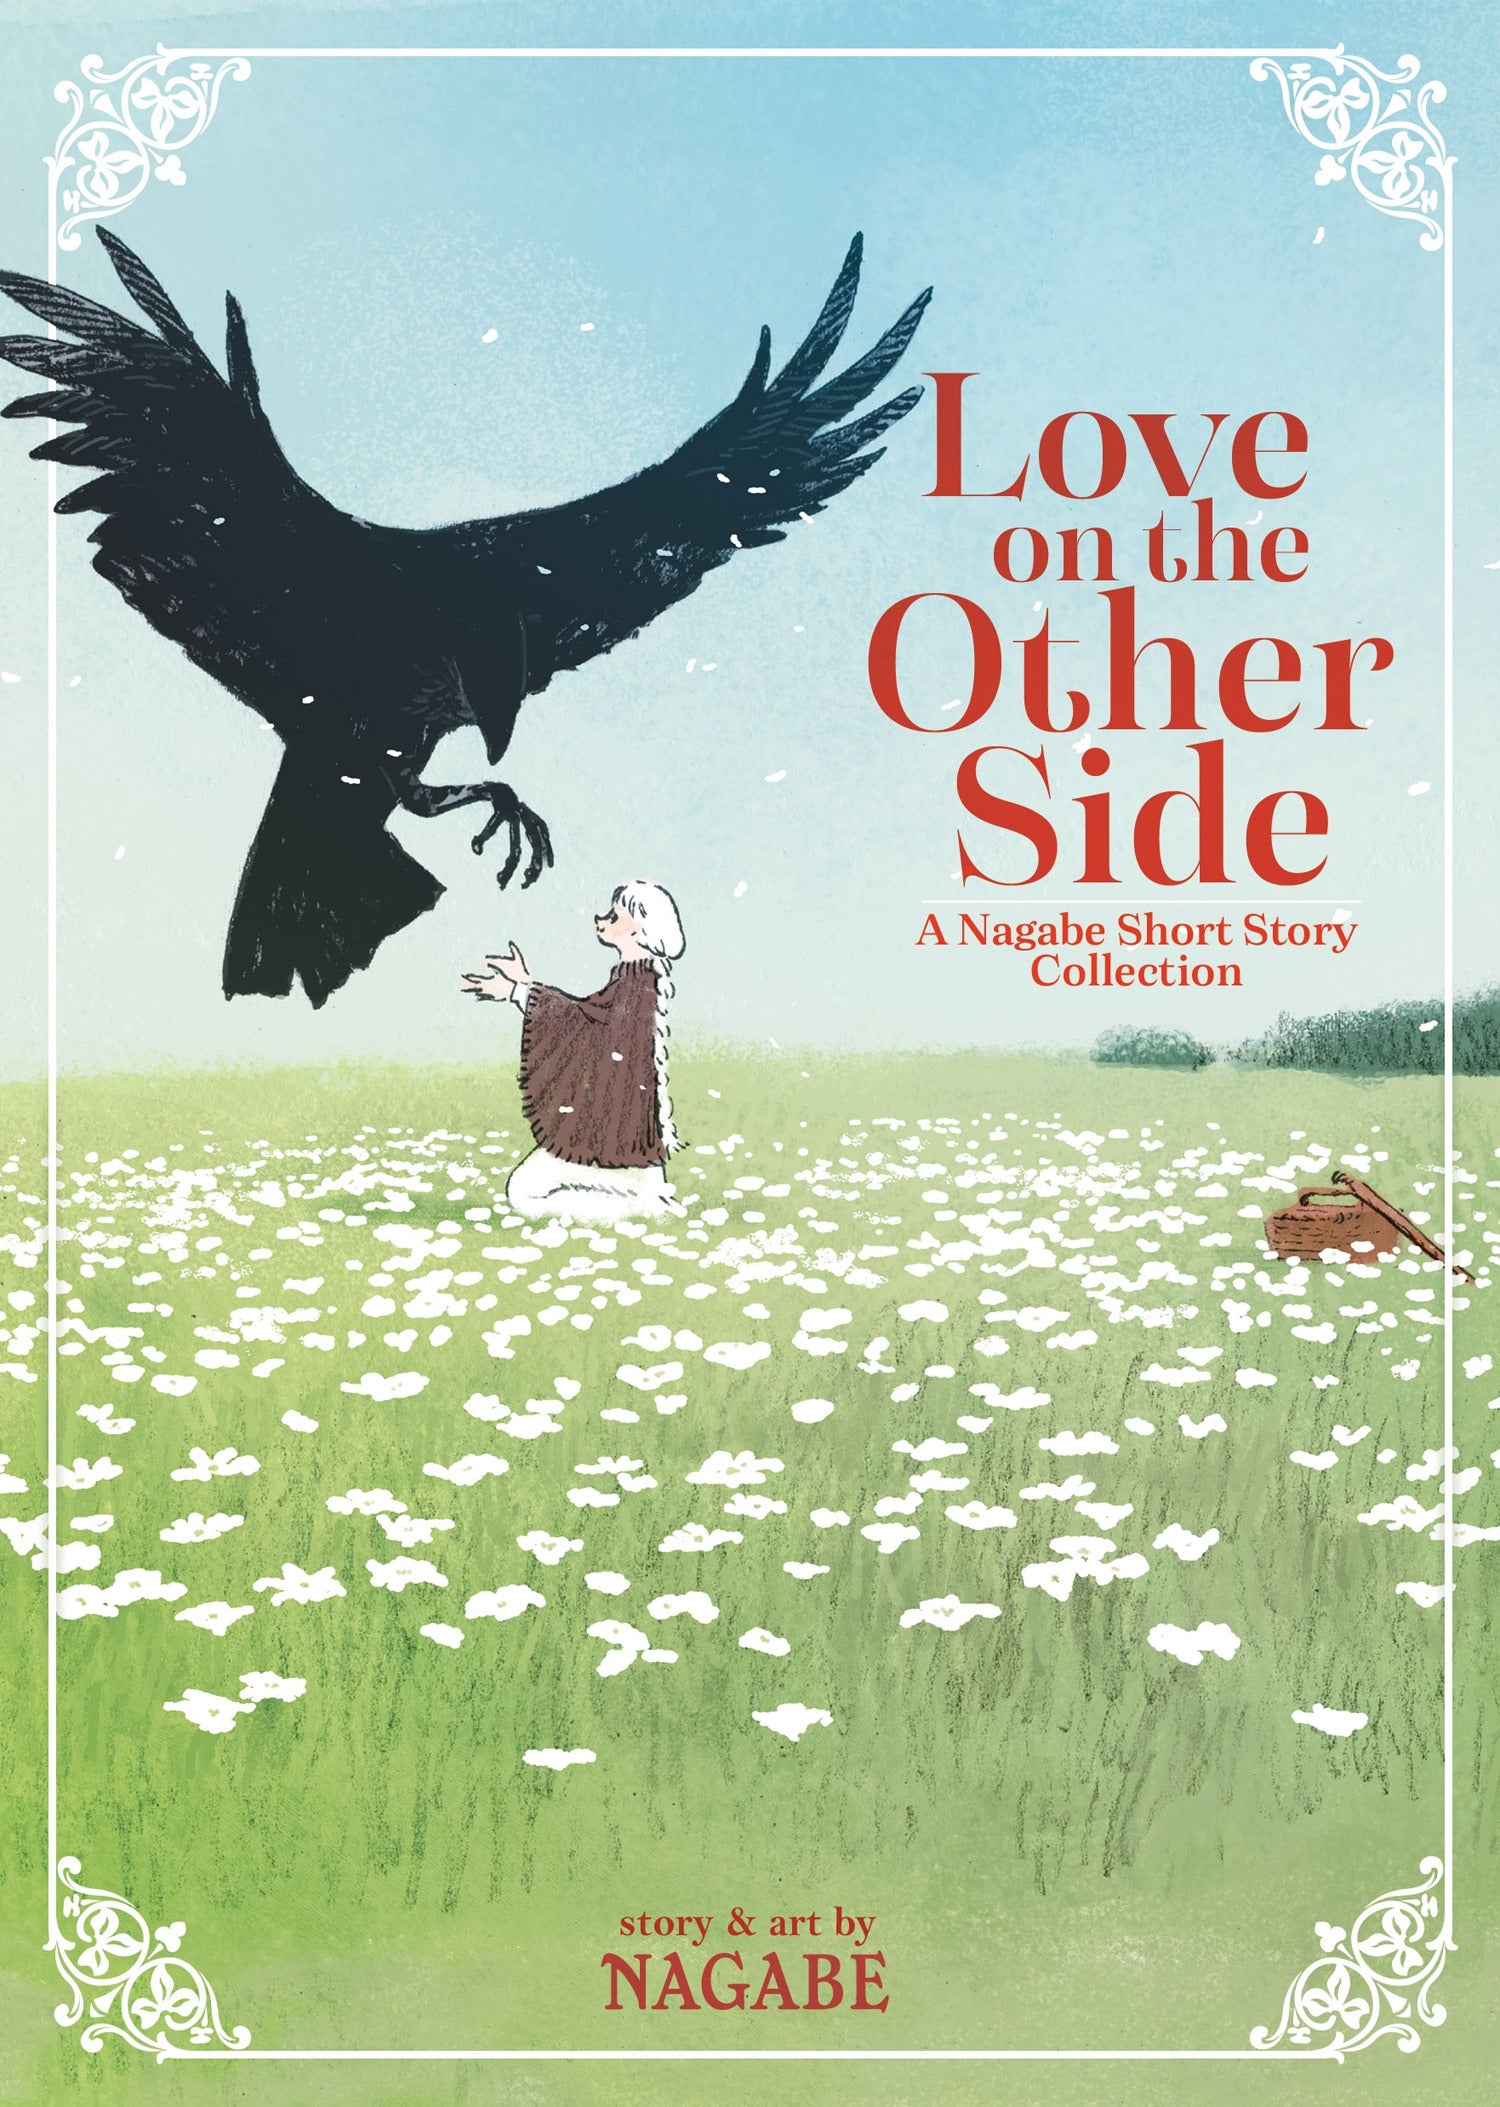 Love on the Other Side - A Nagabe Short Story Collection - Manga Warehouse